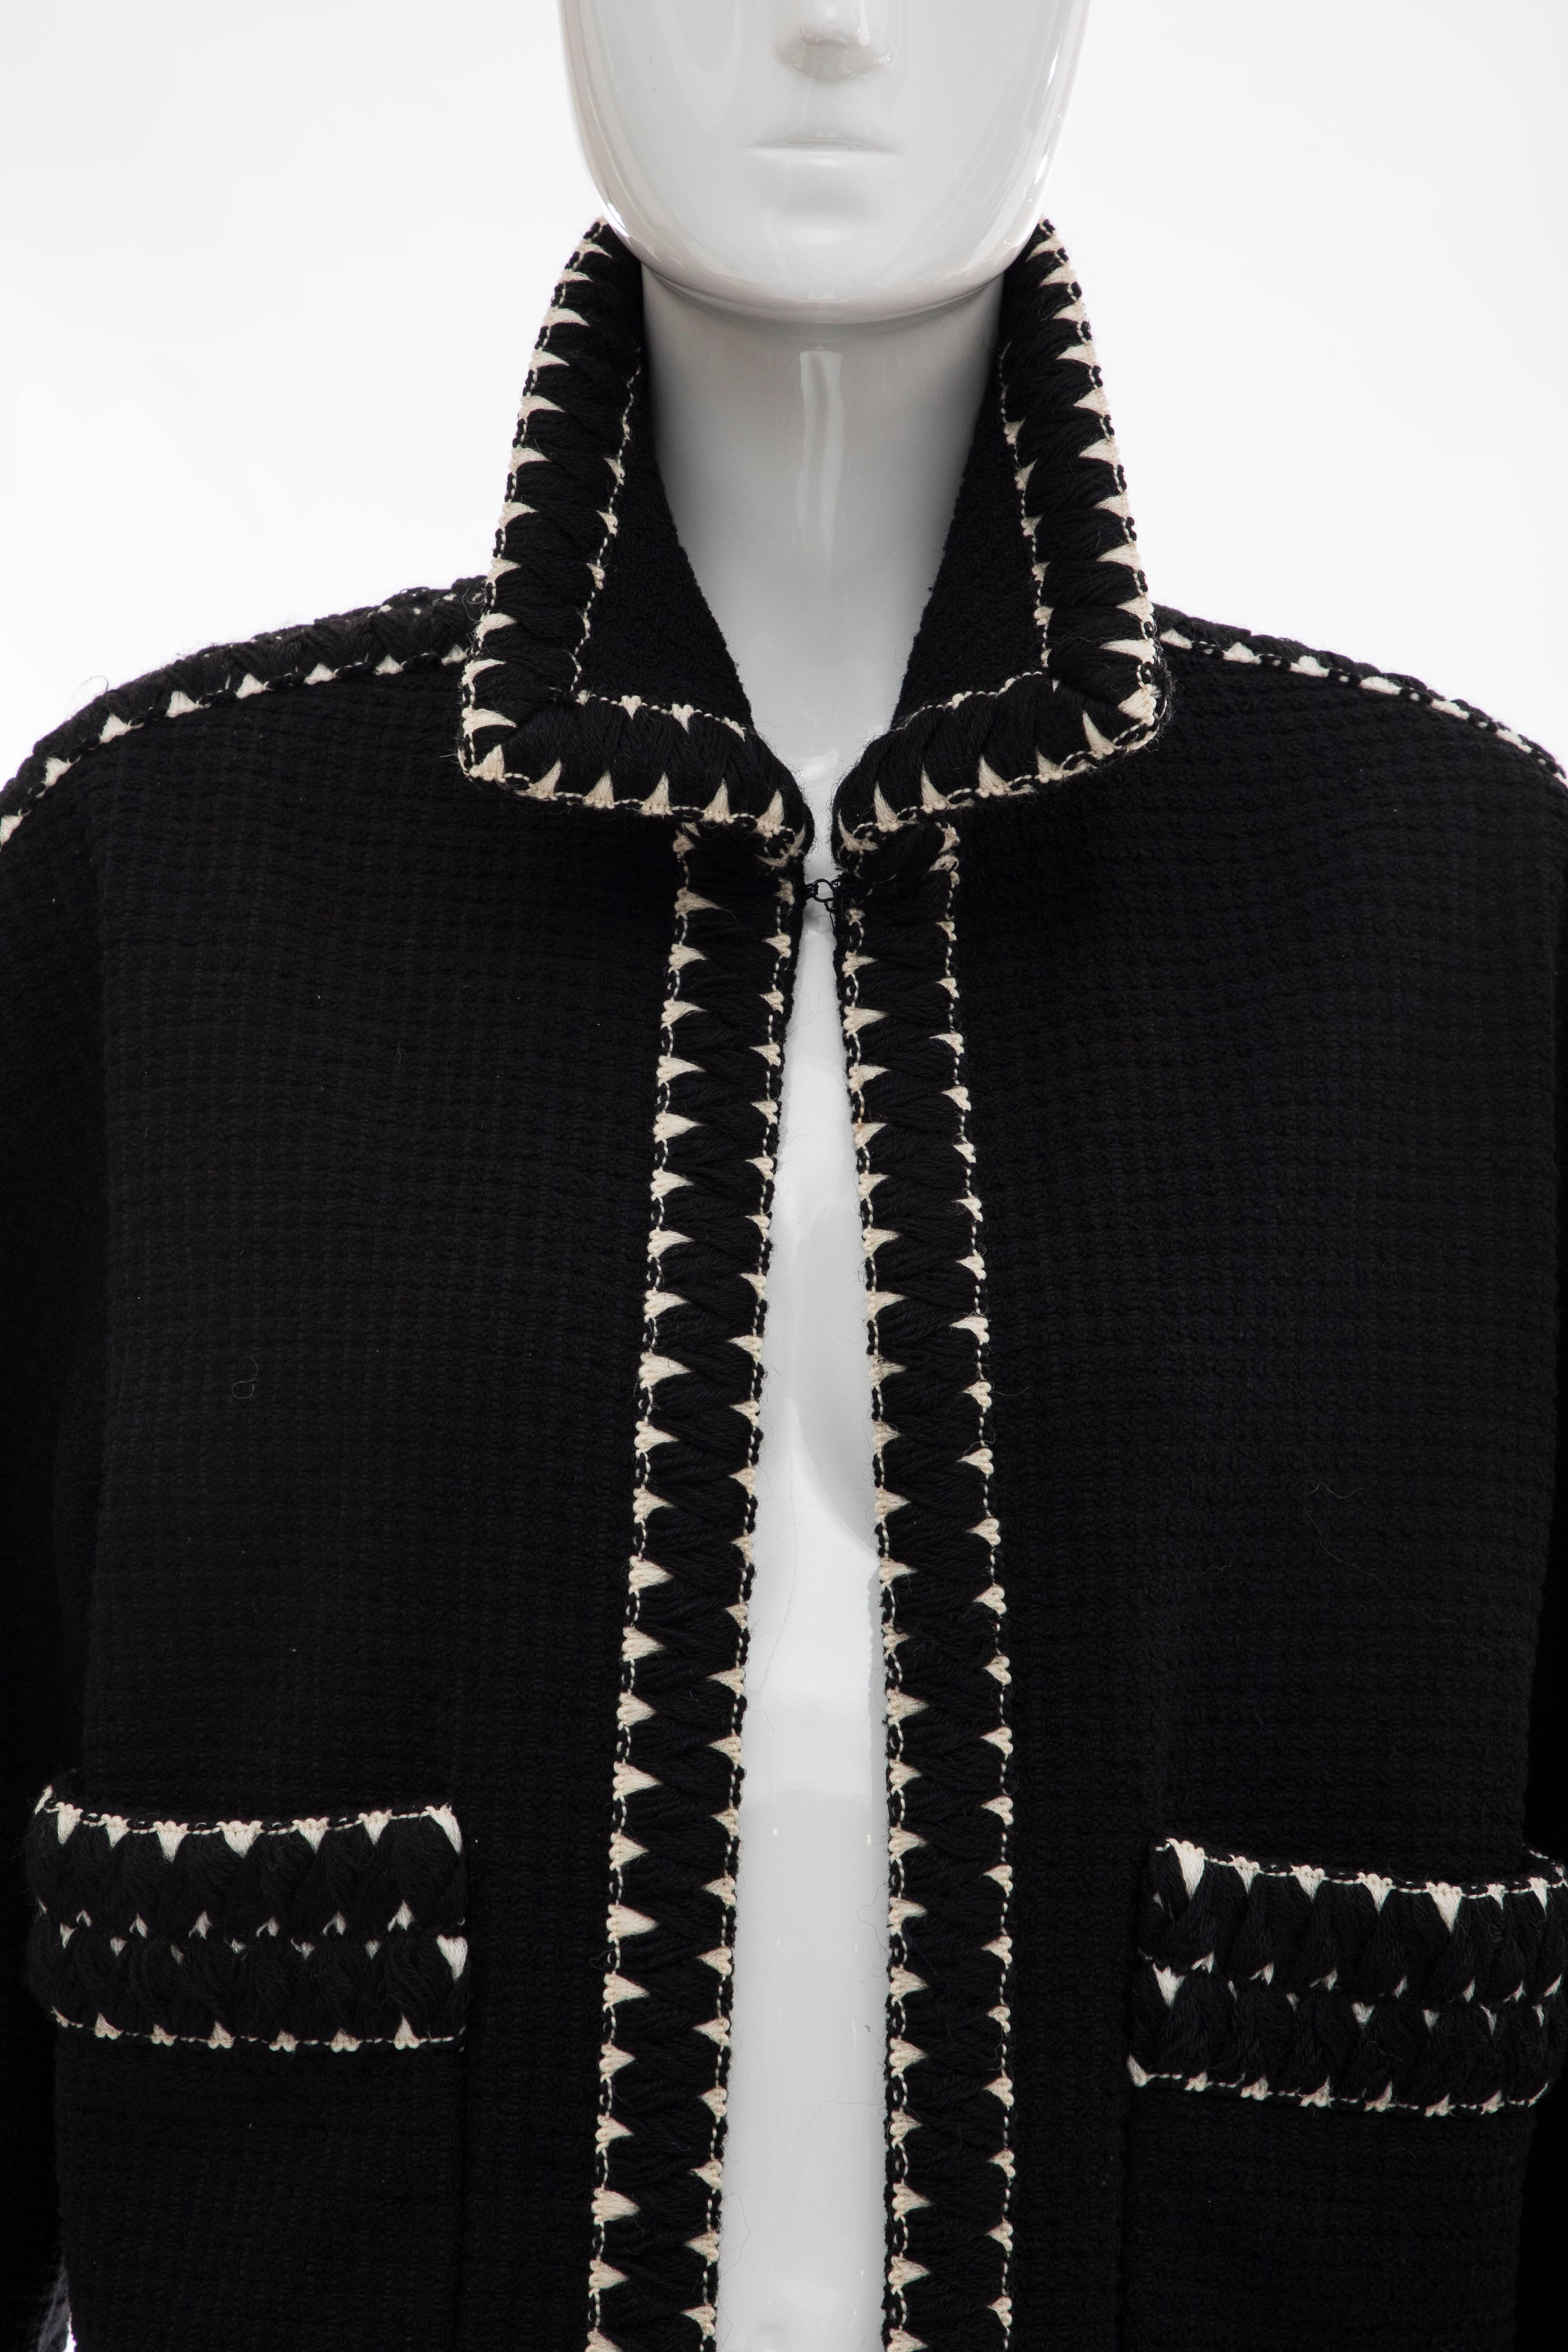 Chanel Black Tweed Jacket With Embroidered Trim, Circa 1980's 1